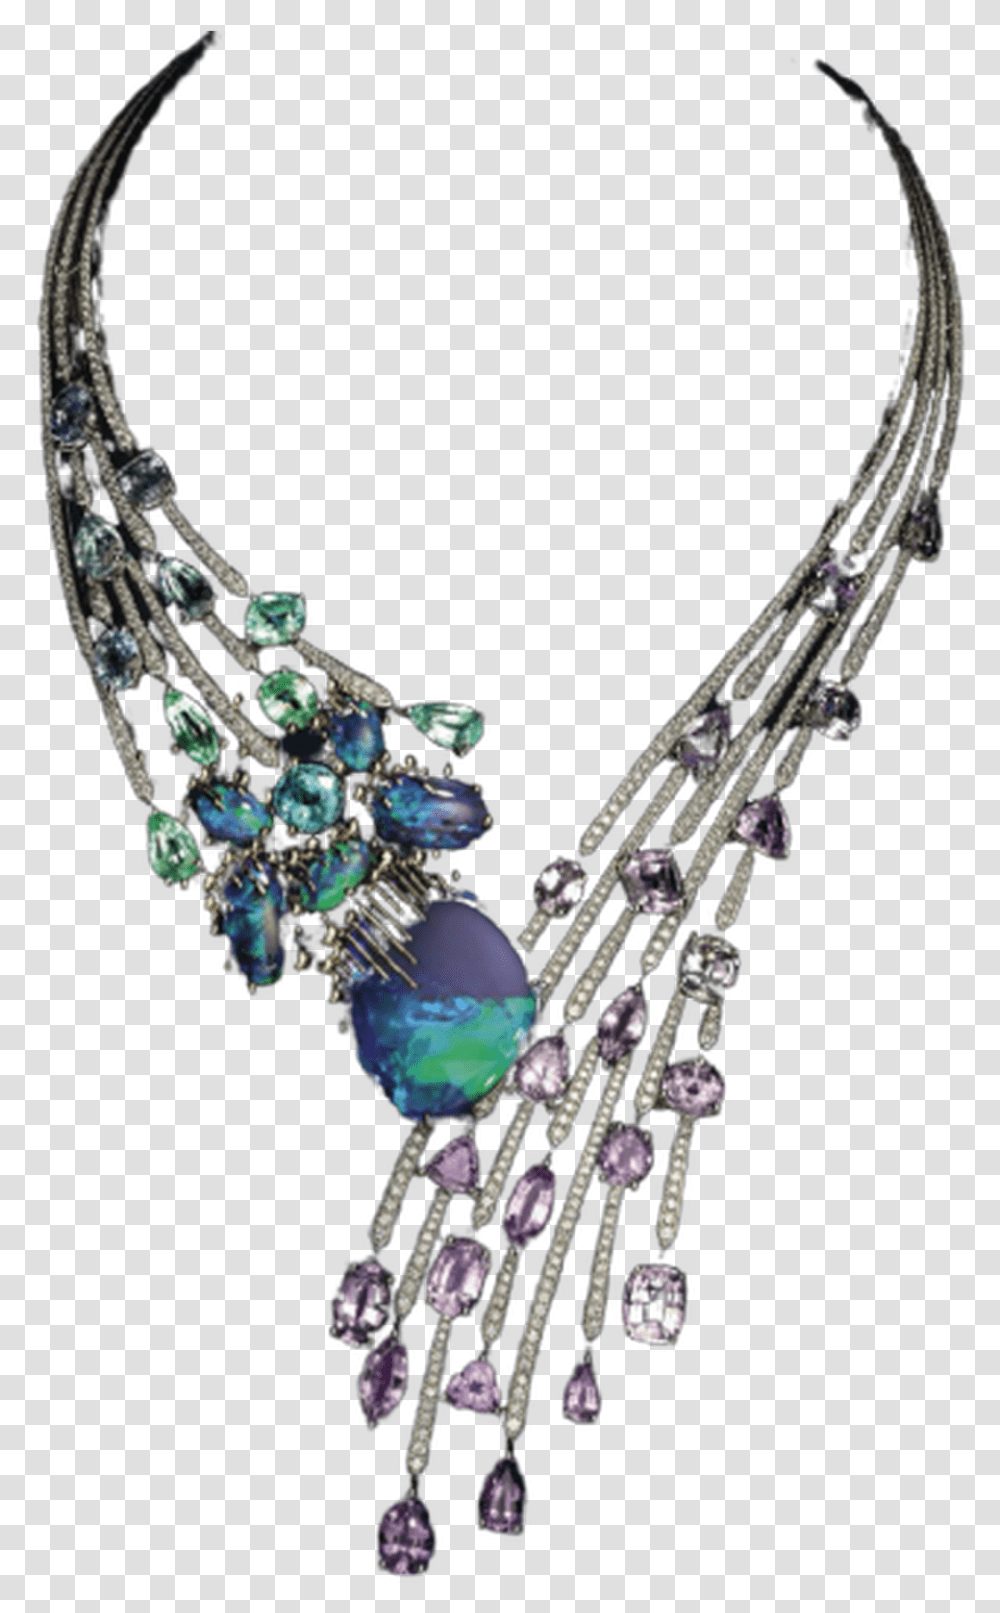 Necklace, Accessories, Accessory, Jewelry, Gemstone Transparent Png